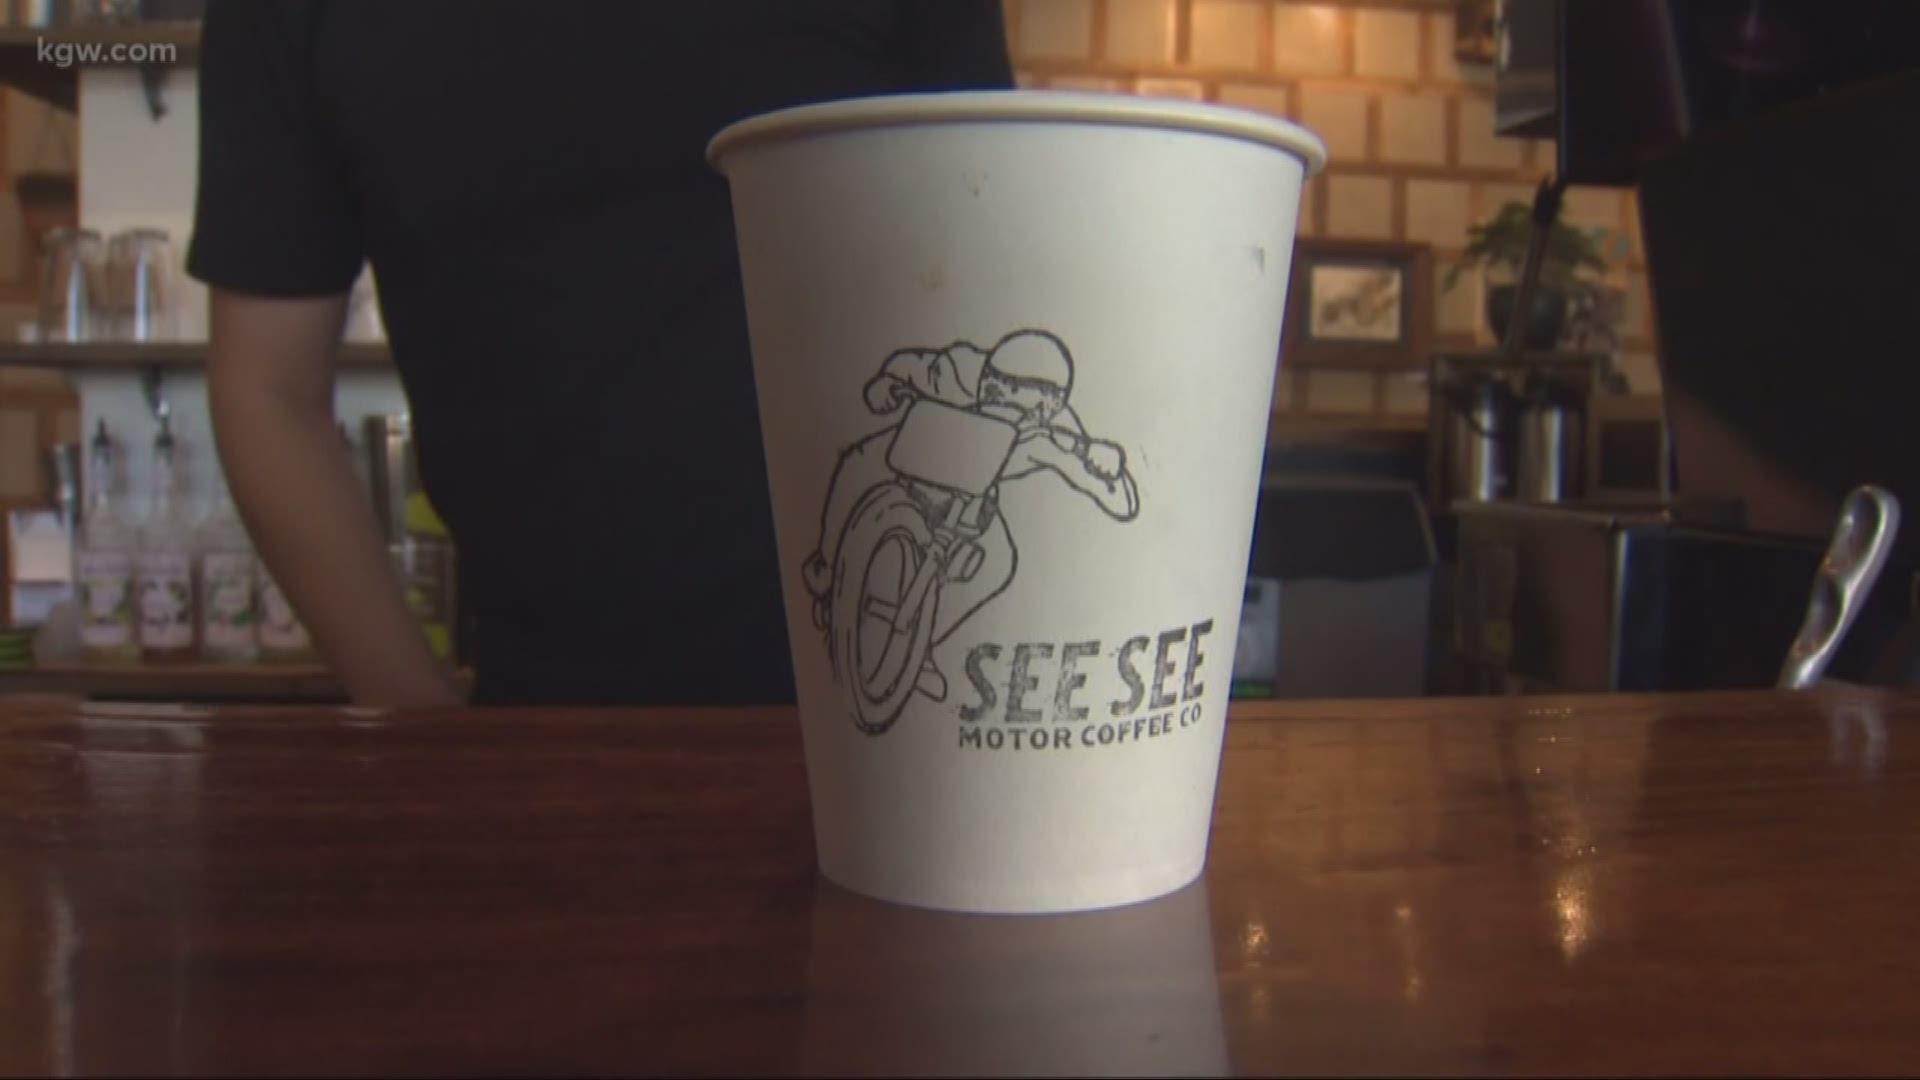 We’re finding the fun at a unique Portland business where they have an unusual combination of products for sale. You can pick up a coffee, and shop for a motorcycle. It’s called See See Motor Coffee Company, and owner Thor Drake spoke with KGW about the fun and interesting business idea.